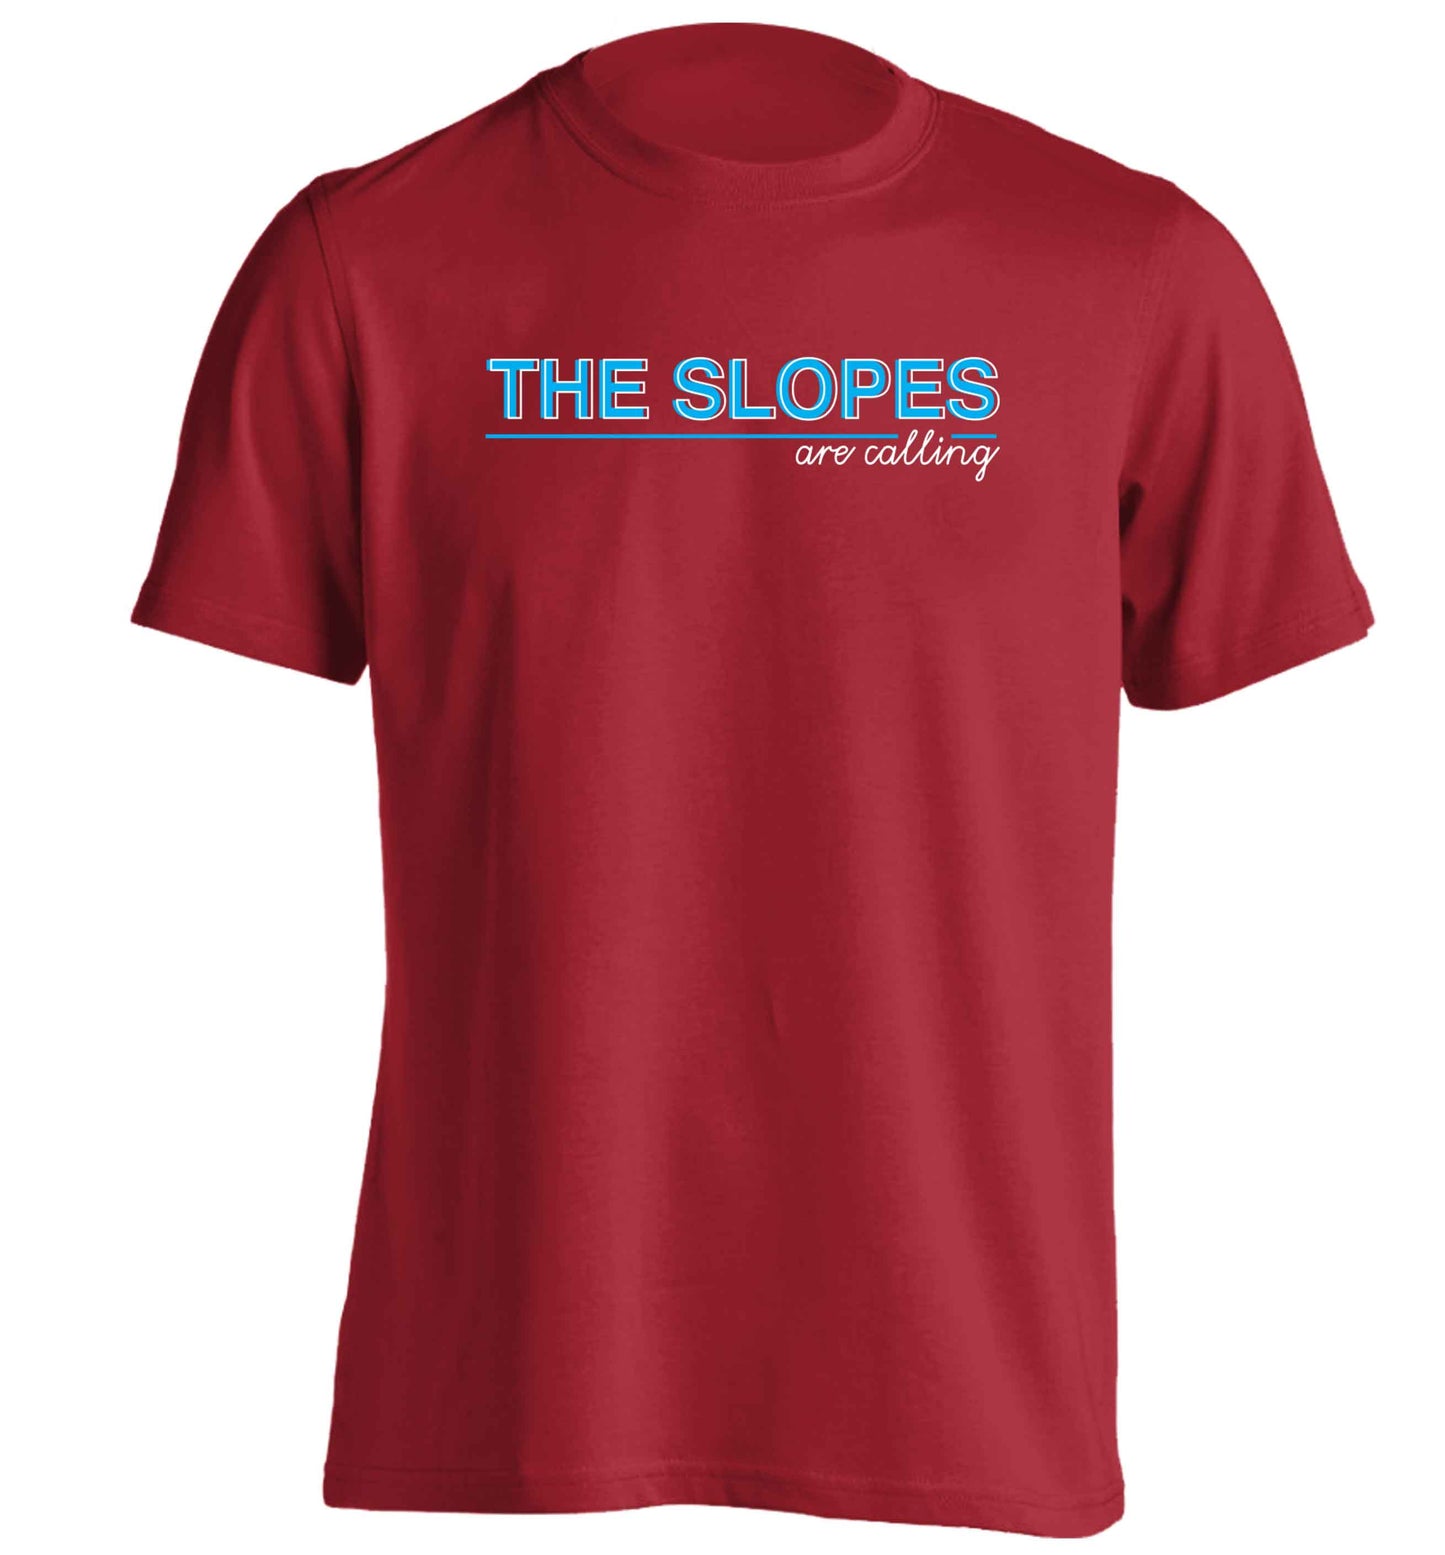 The slopes are calling adults unisex red Tshirt 2XL